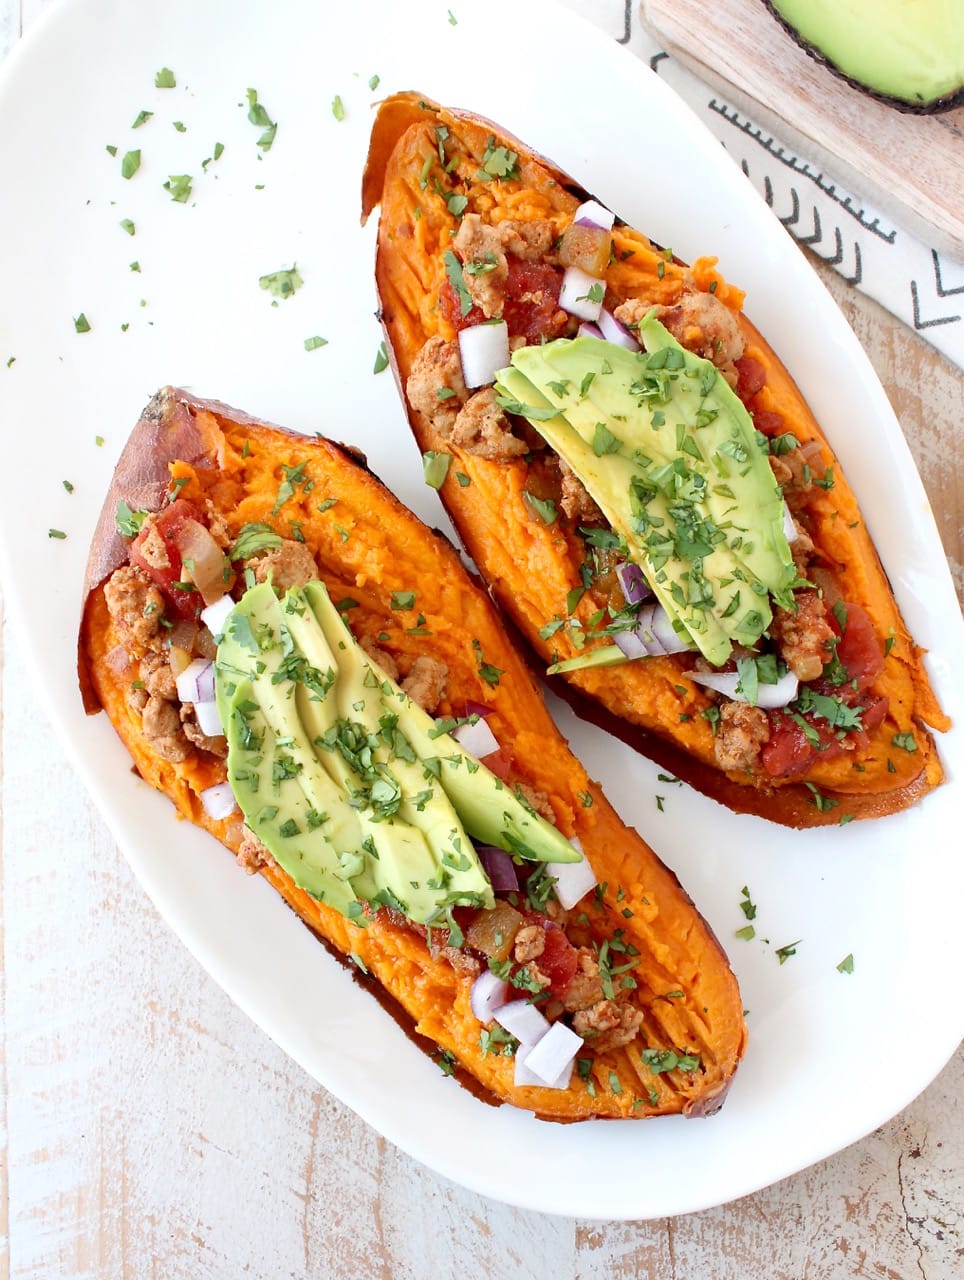 baked sweet potato sliced in half on white plate, topped with chili, avocado and cilantro